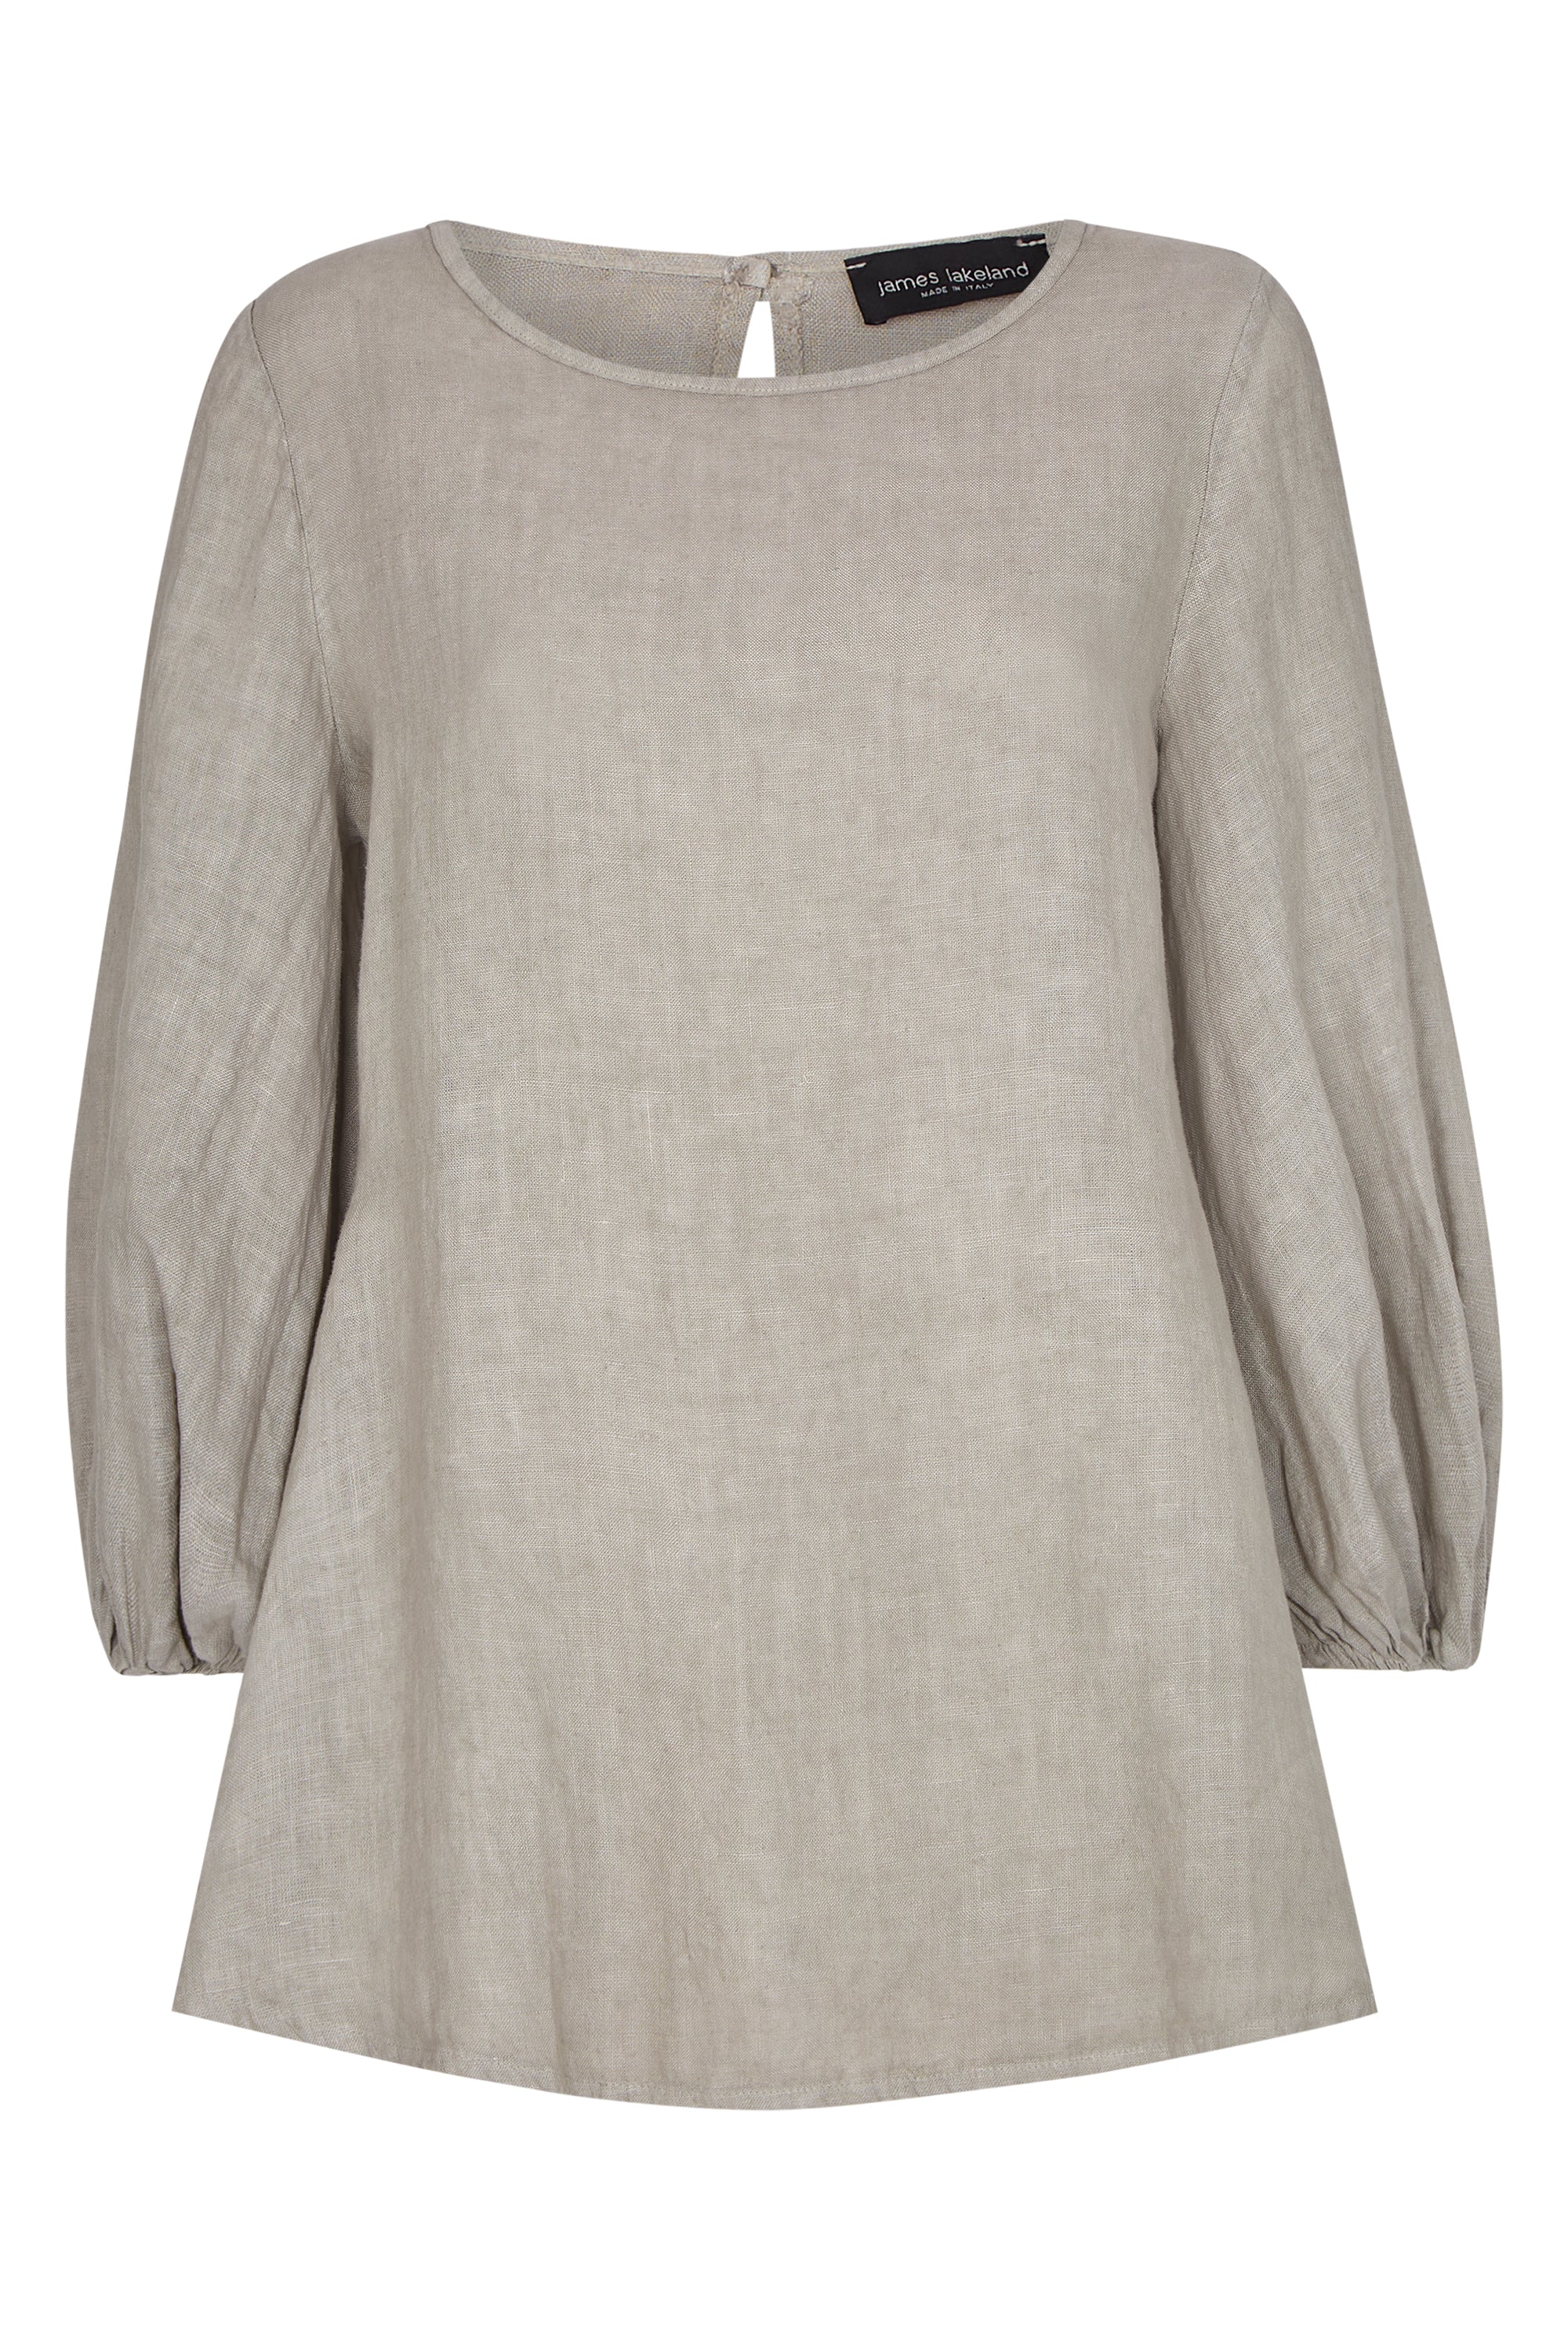 Women’s Neutrals Puff Sleeve Linen Blouse - Taupe Extra Small James Lakeland